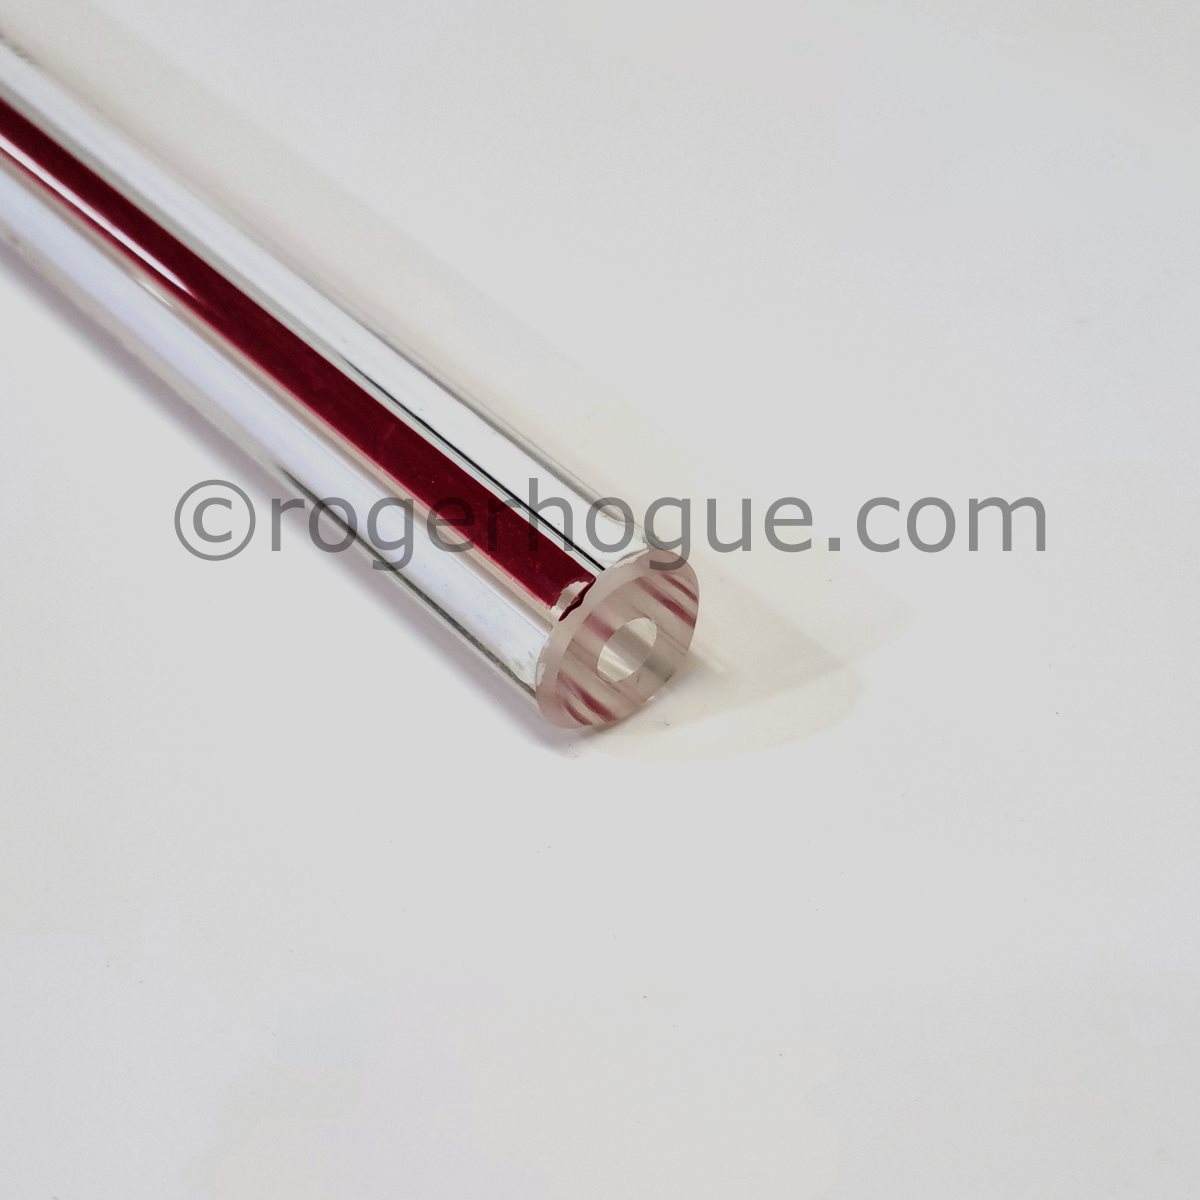 HEAVY WALL GLASS GAUGE 3/4'' X 48'' RED LINE 7/32'' THICK. WALL